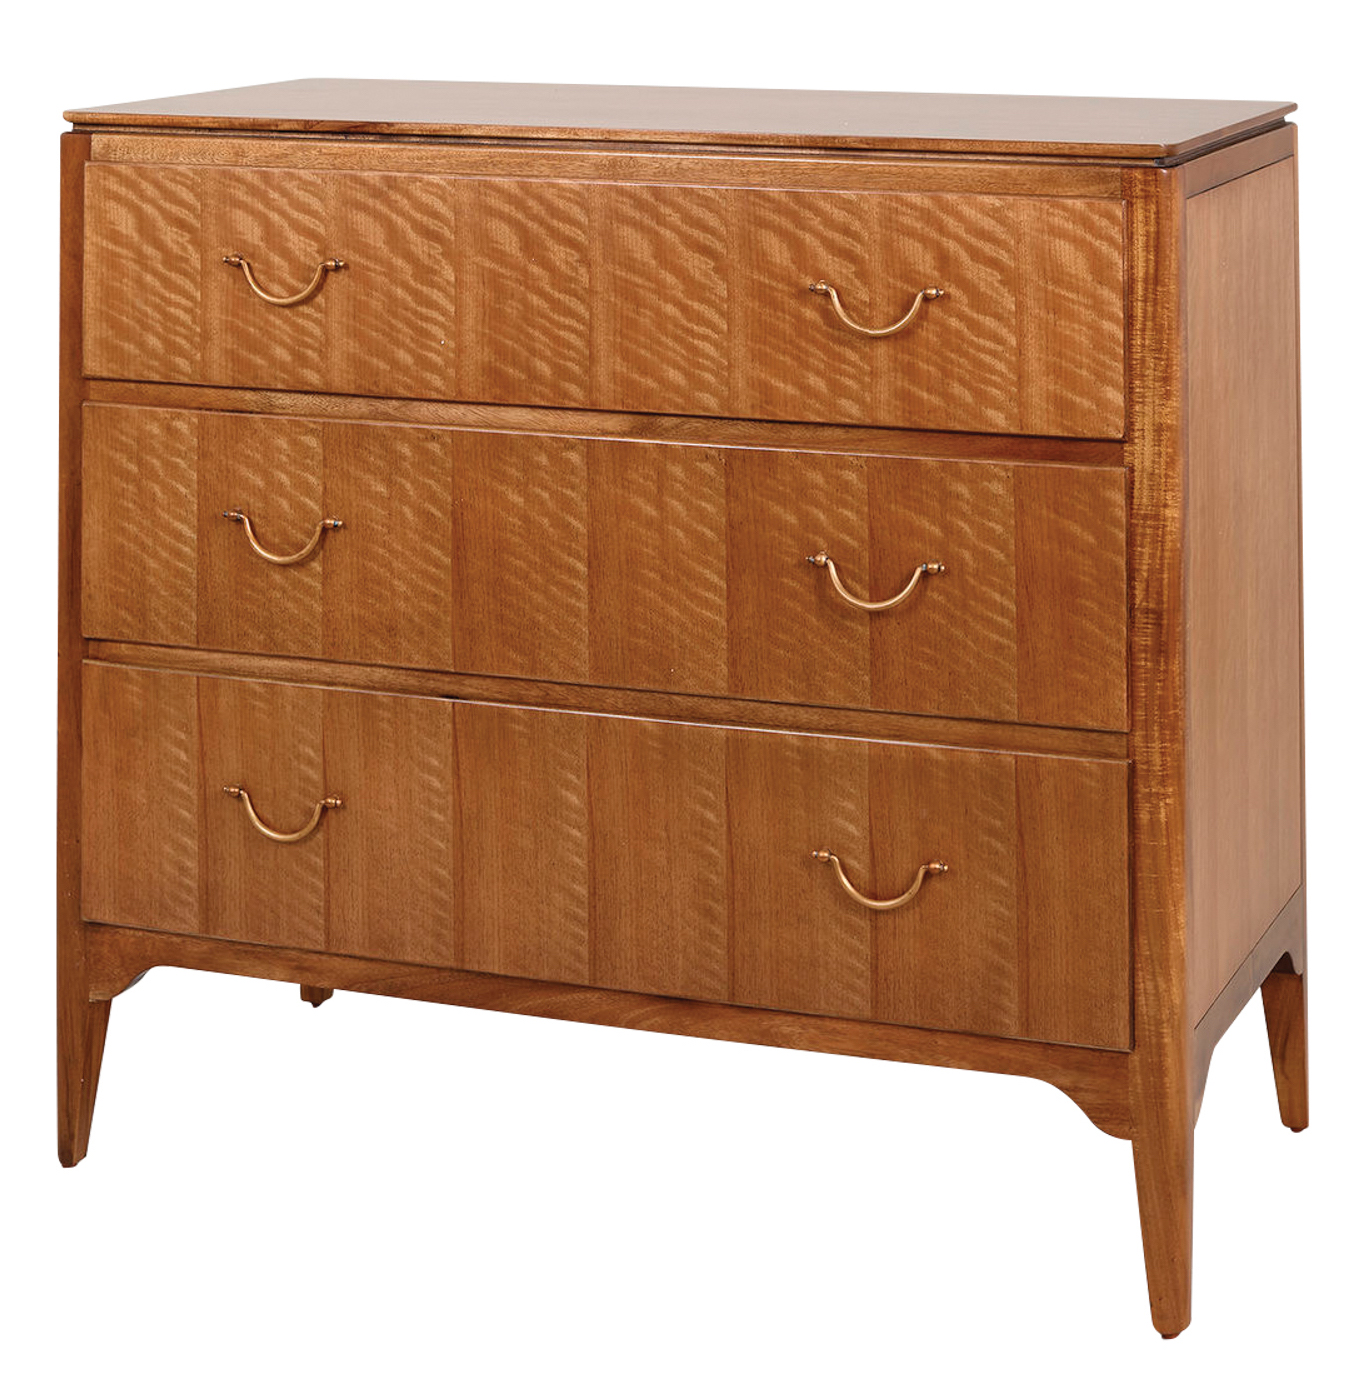 brown three drawer console suggested by Autumn Adeigbo